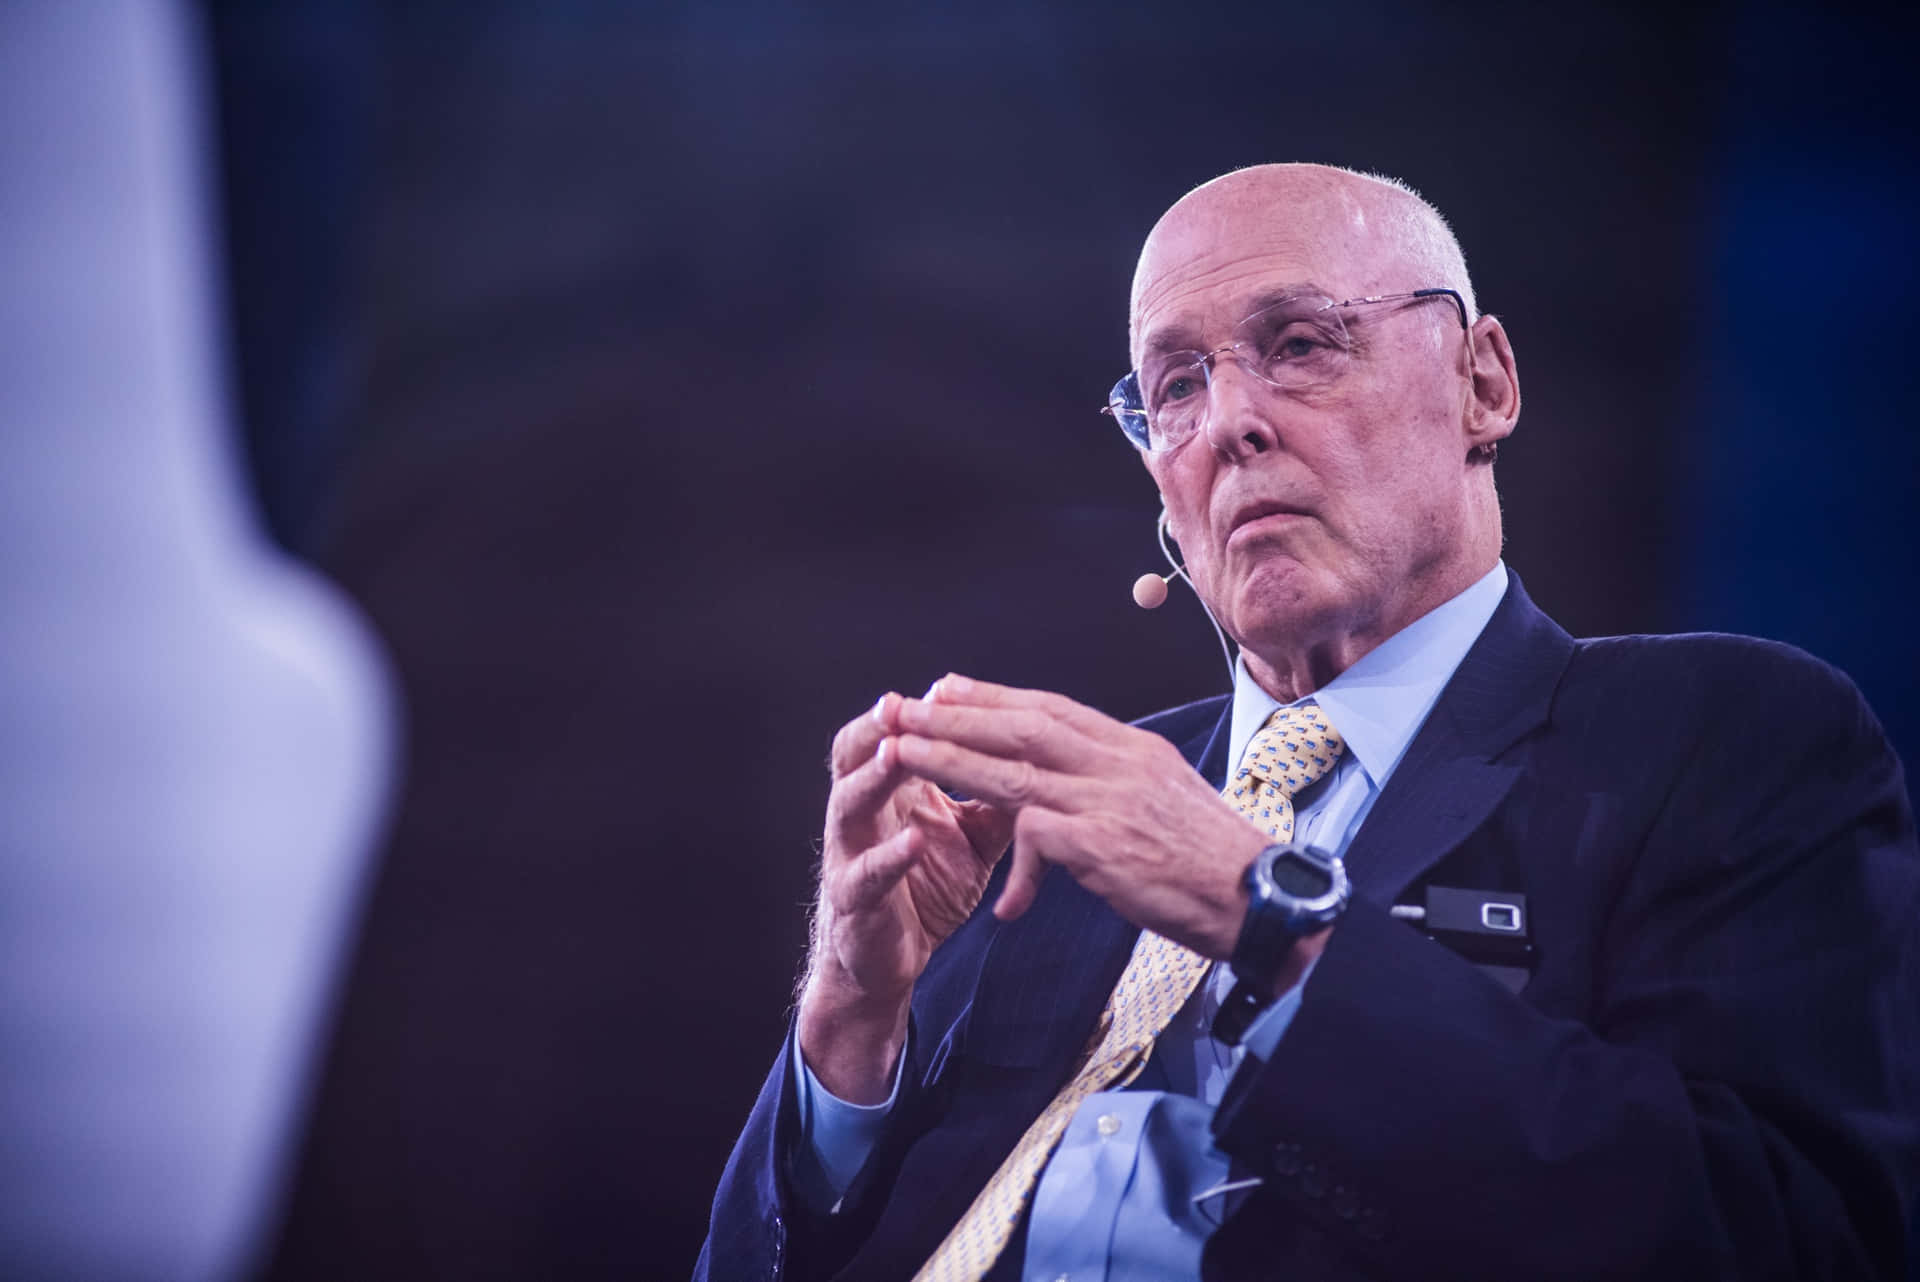 – Henry Paulson in a poised and confident stance Wallpaper